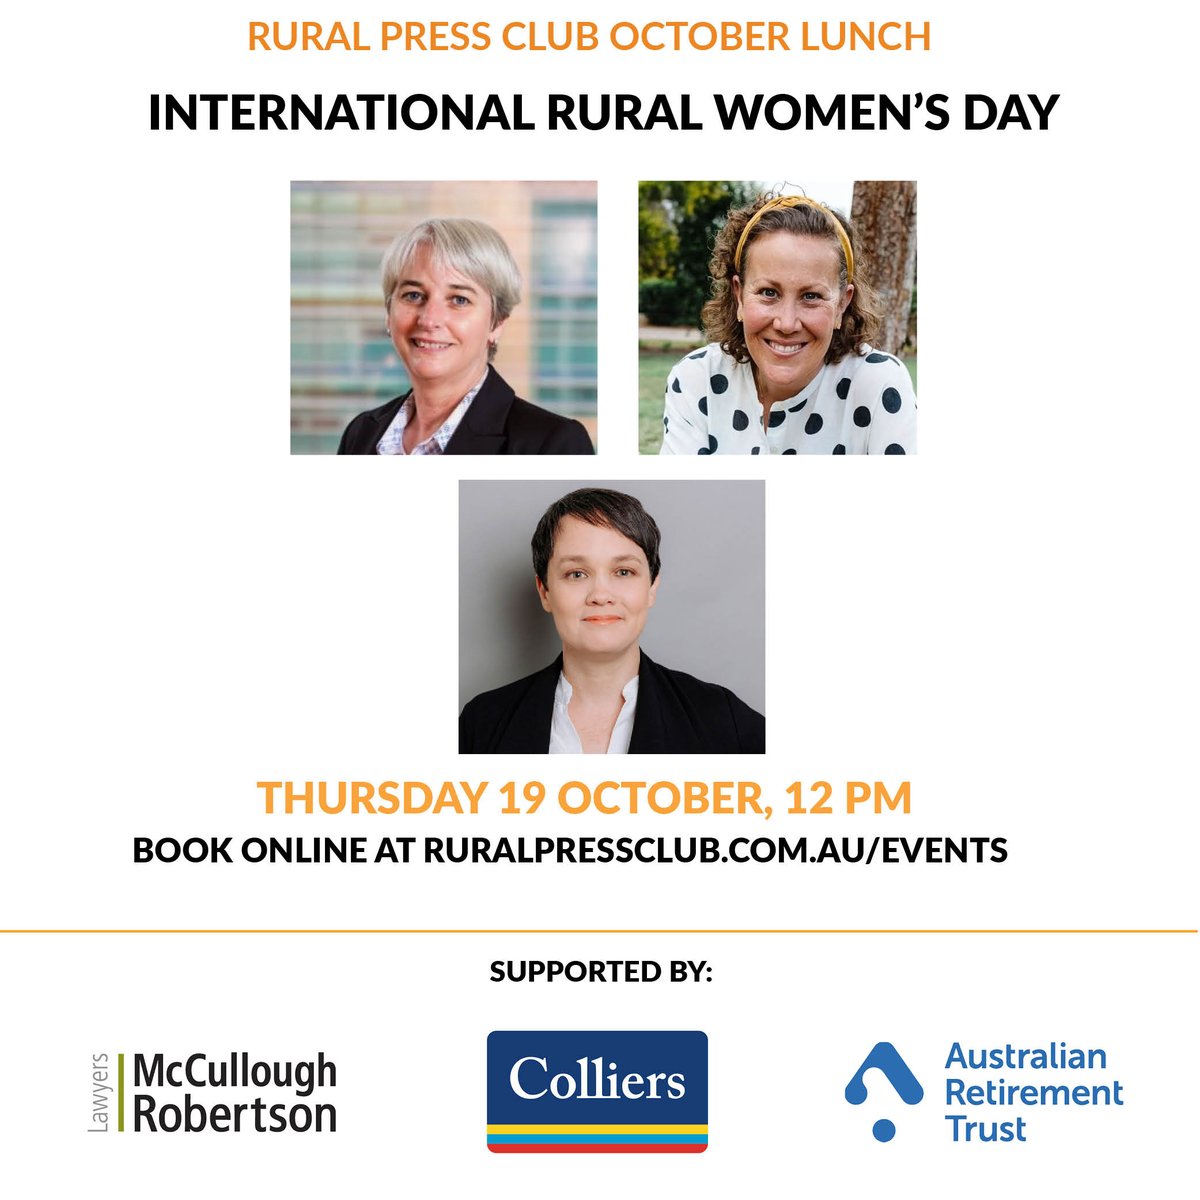 Only 10 tickets remaining! Don't miss out on RPC's International Rural Women's Day Lunch with Queensland's three chiefs: ruralpressclub.com.au/events/event/i…